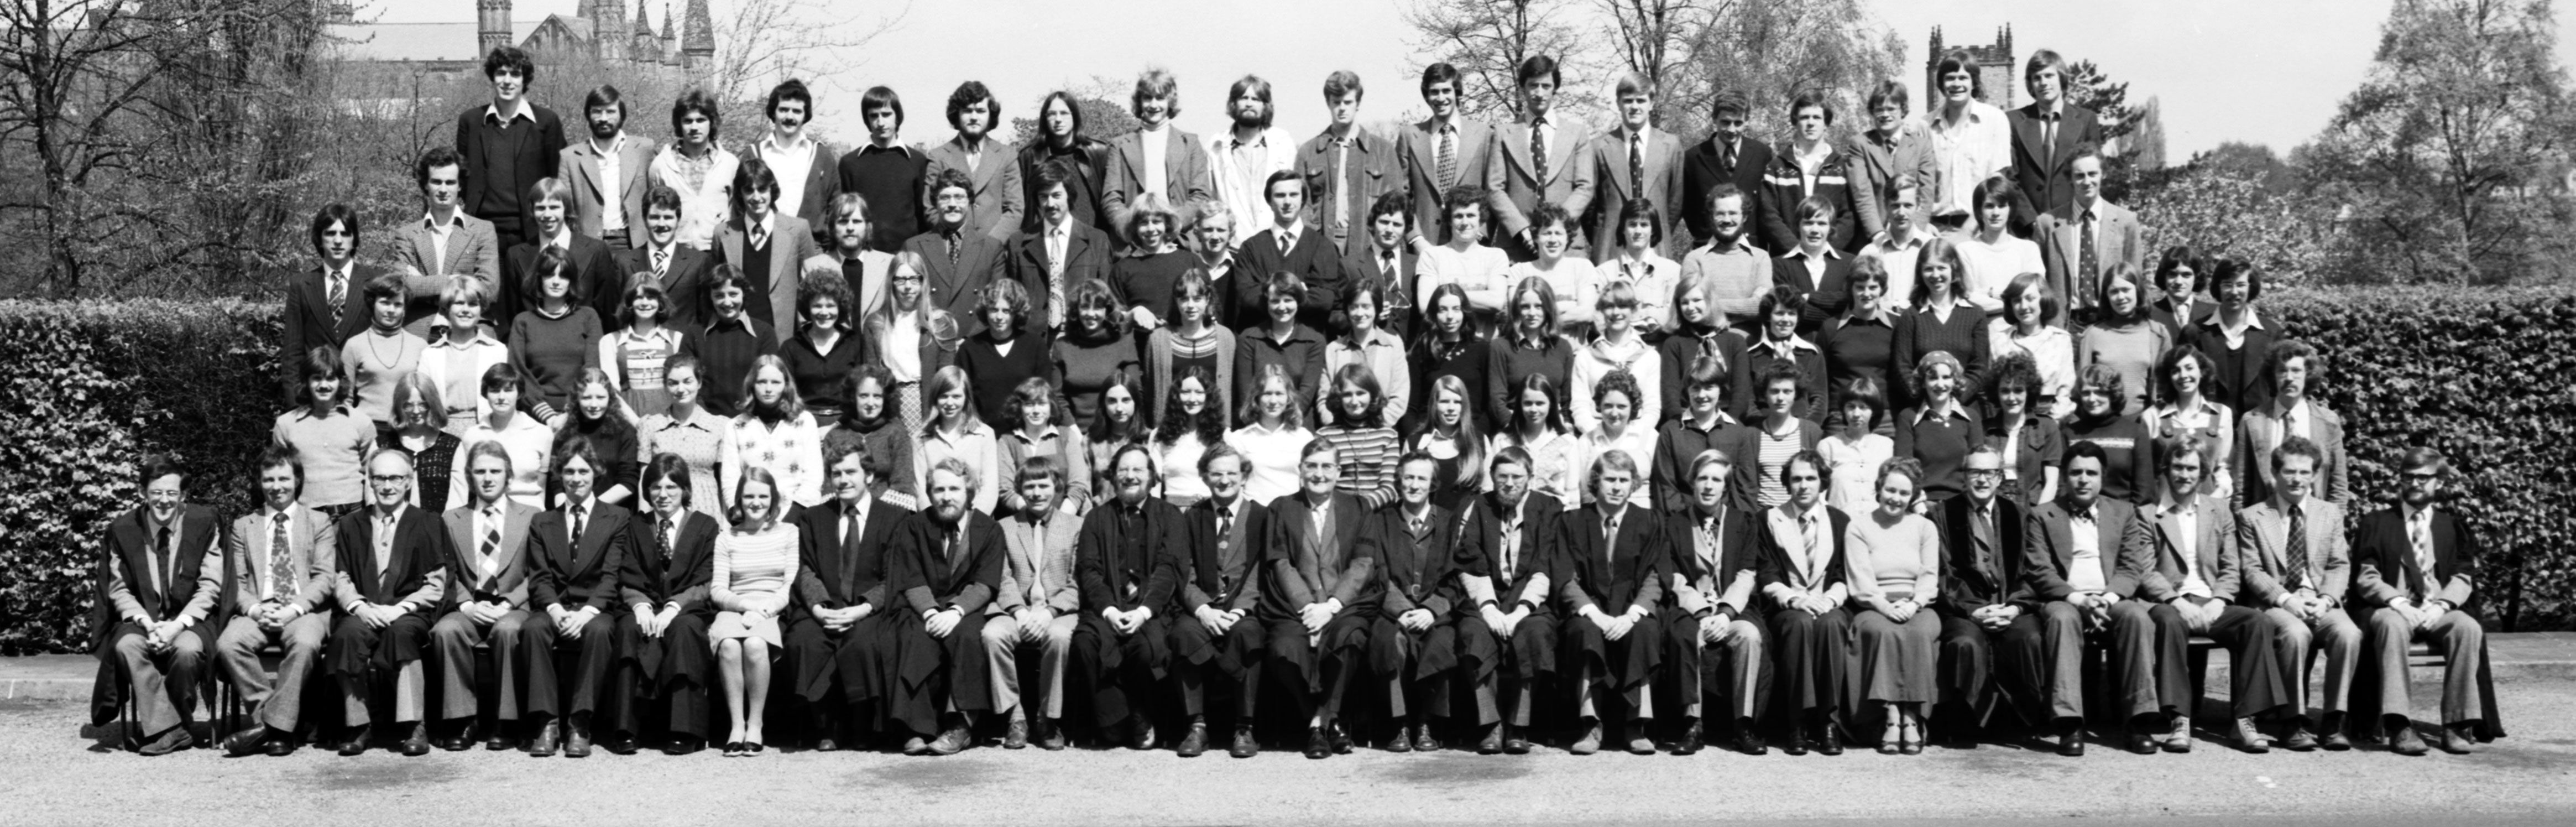 Geography Department Undergraduate Group photo from 1977